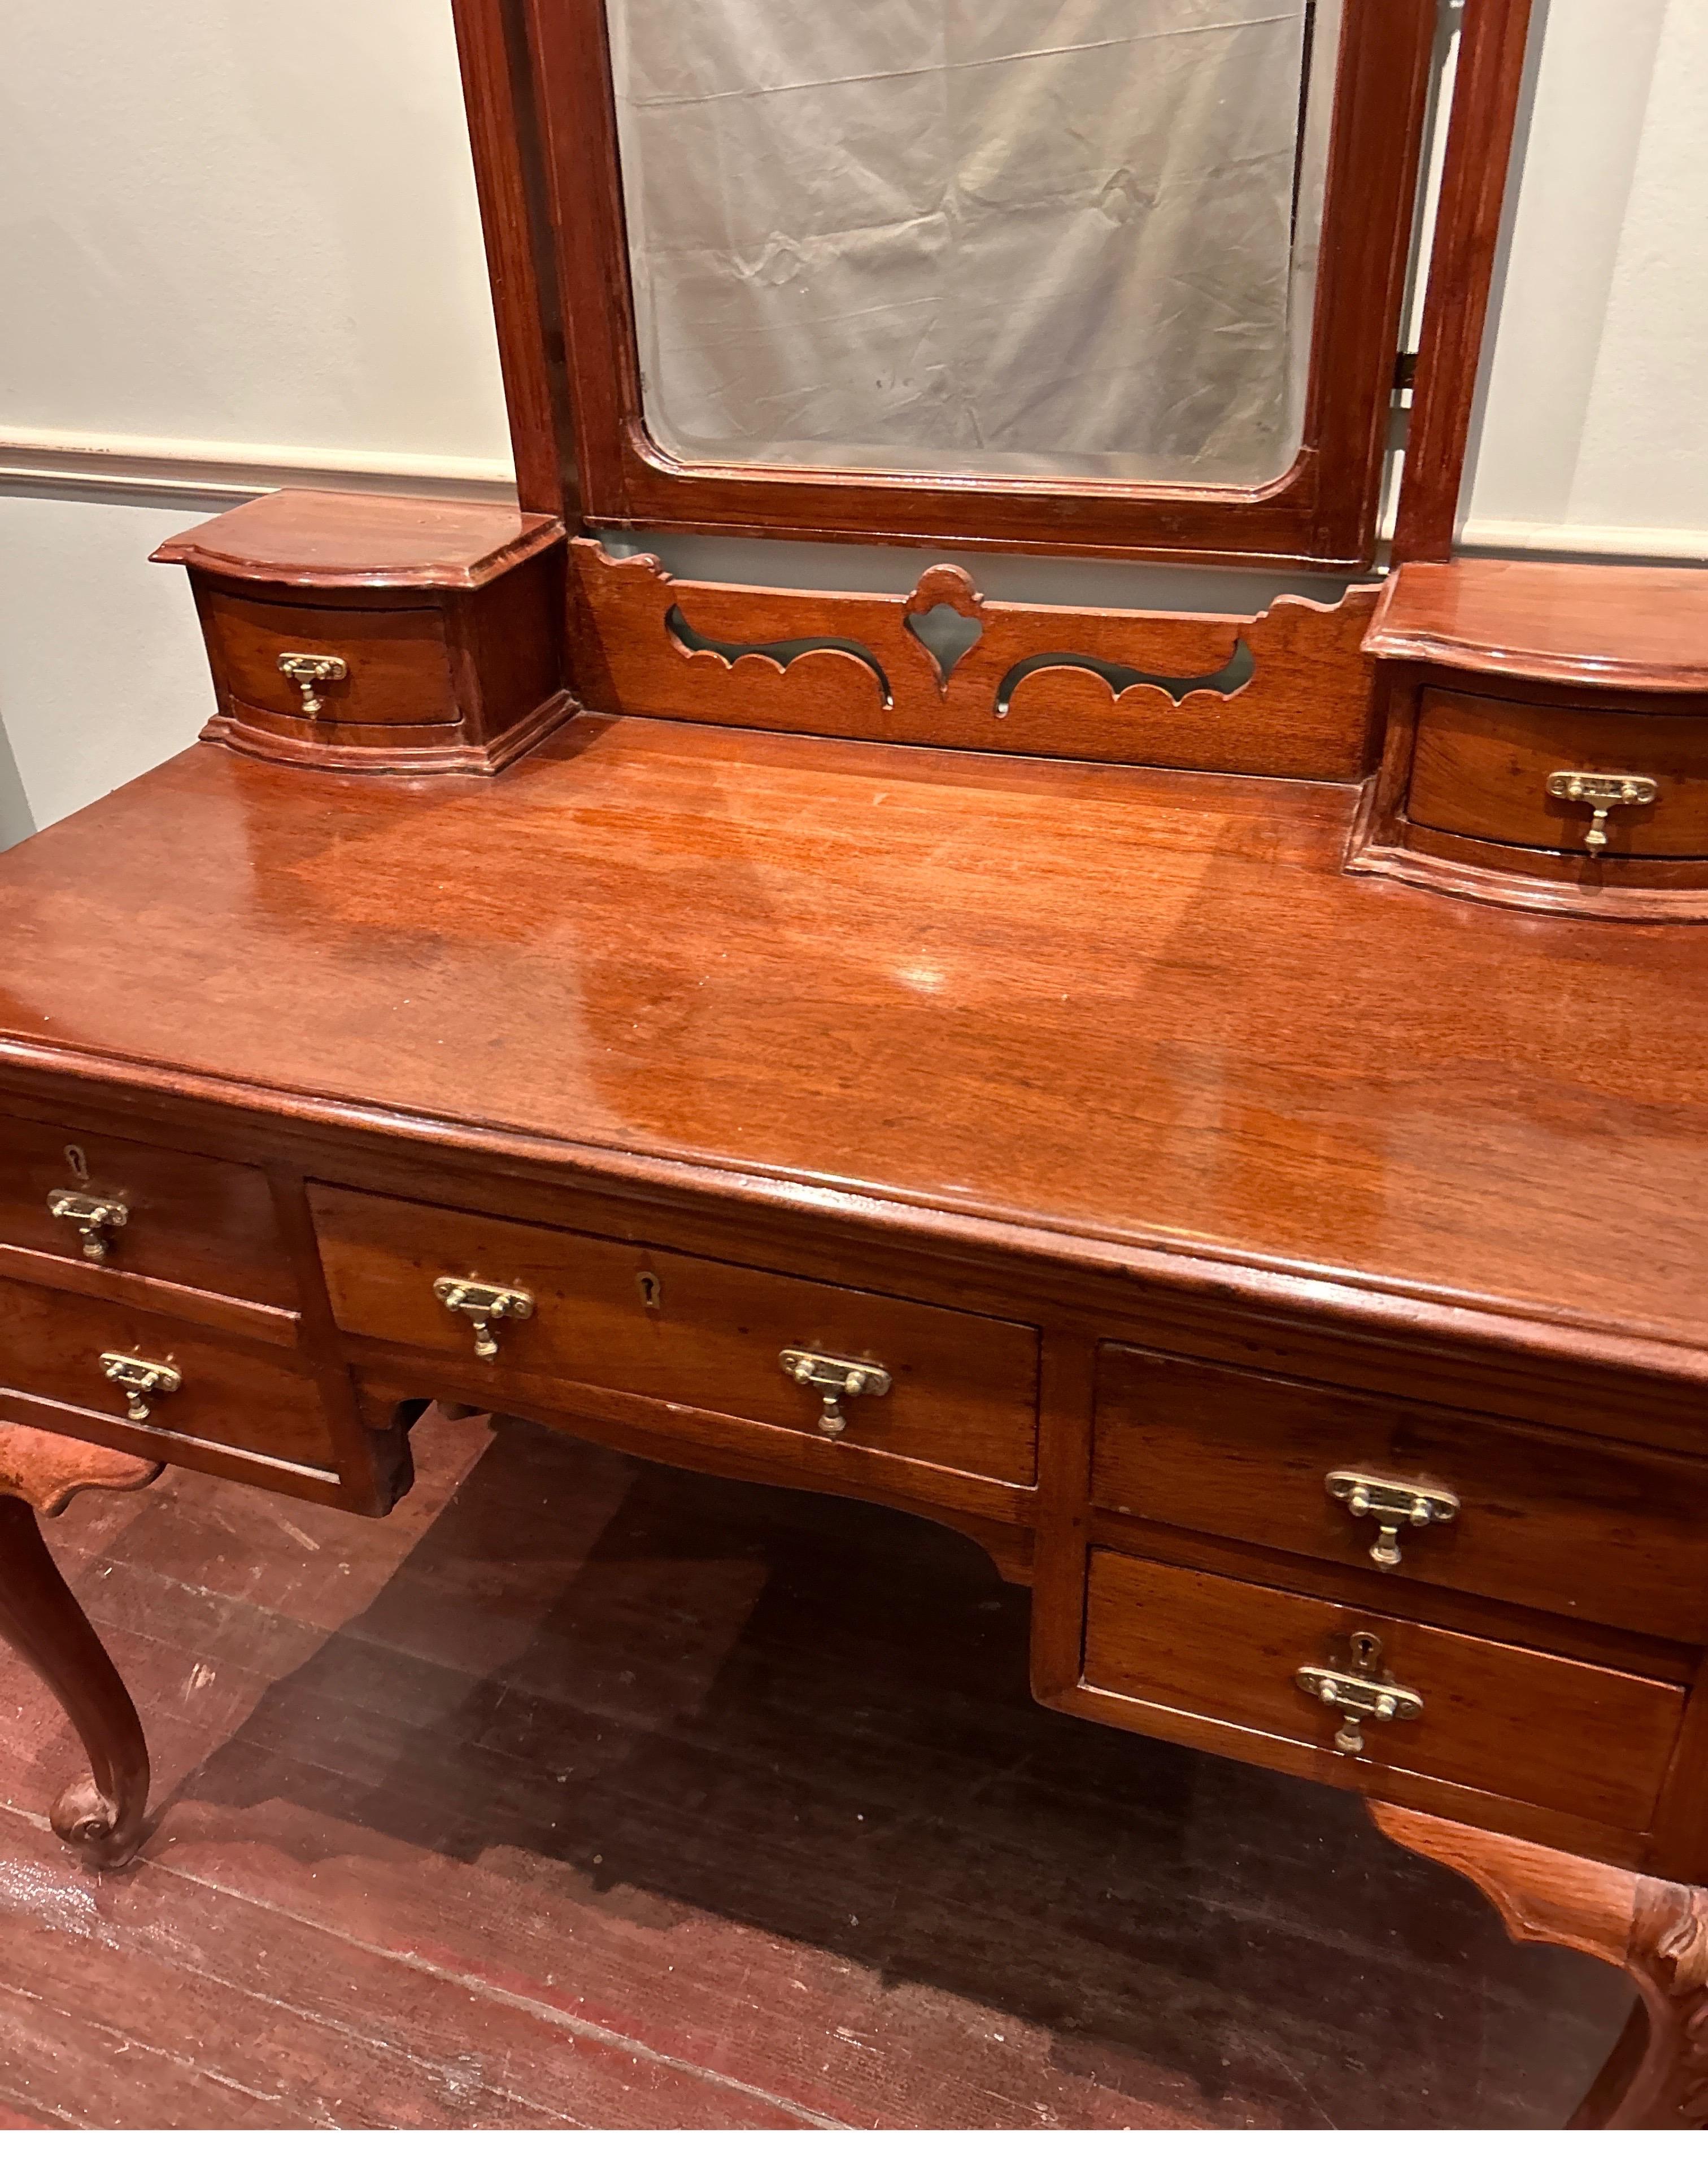 Early 20th Century Art Nouveau Teak Hand Carved Vanity Cum Writing Table With Drawers & Brass Pulls For Sale